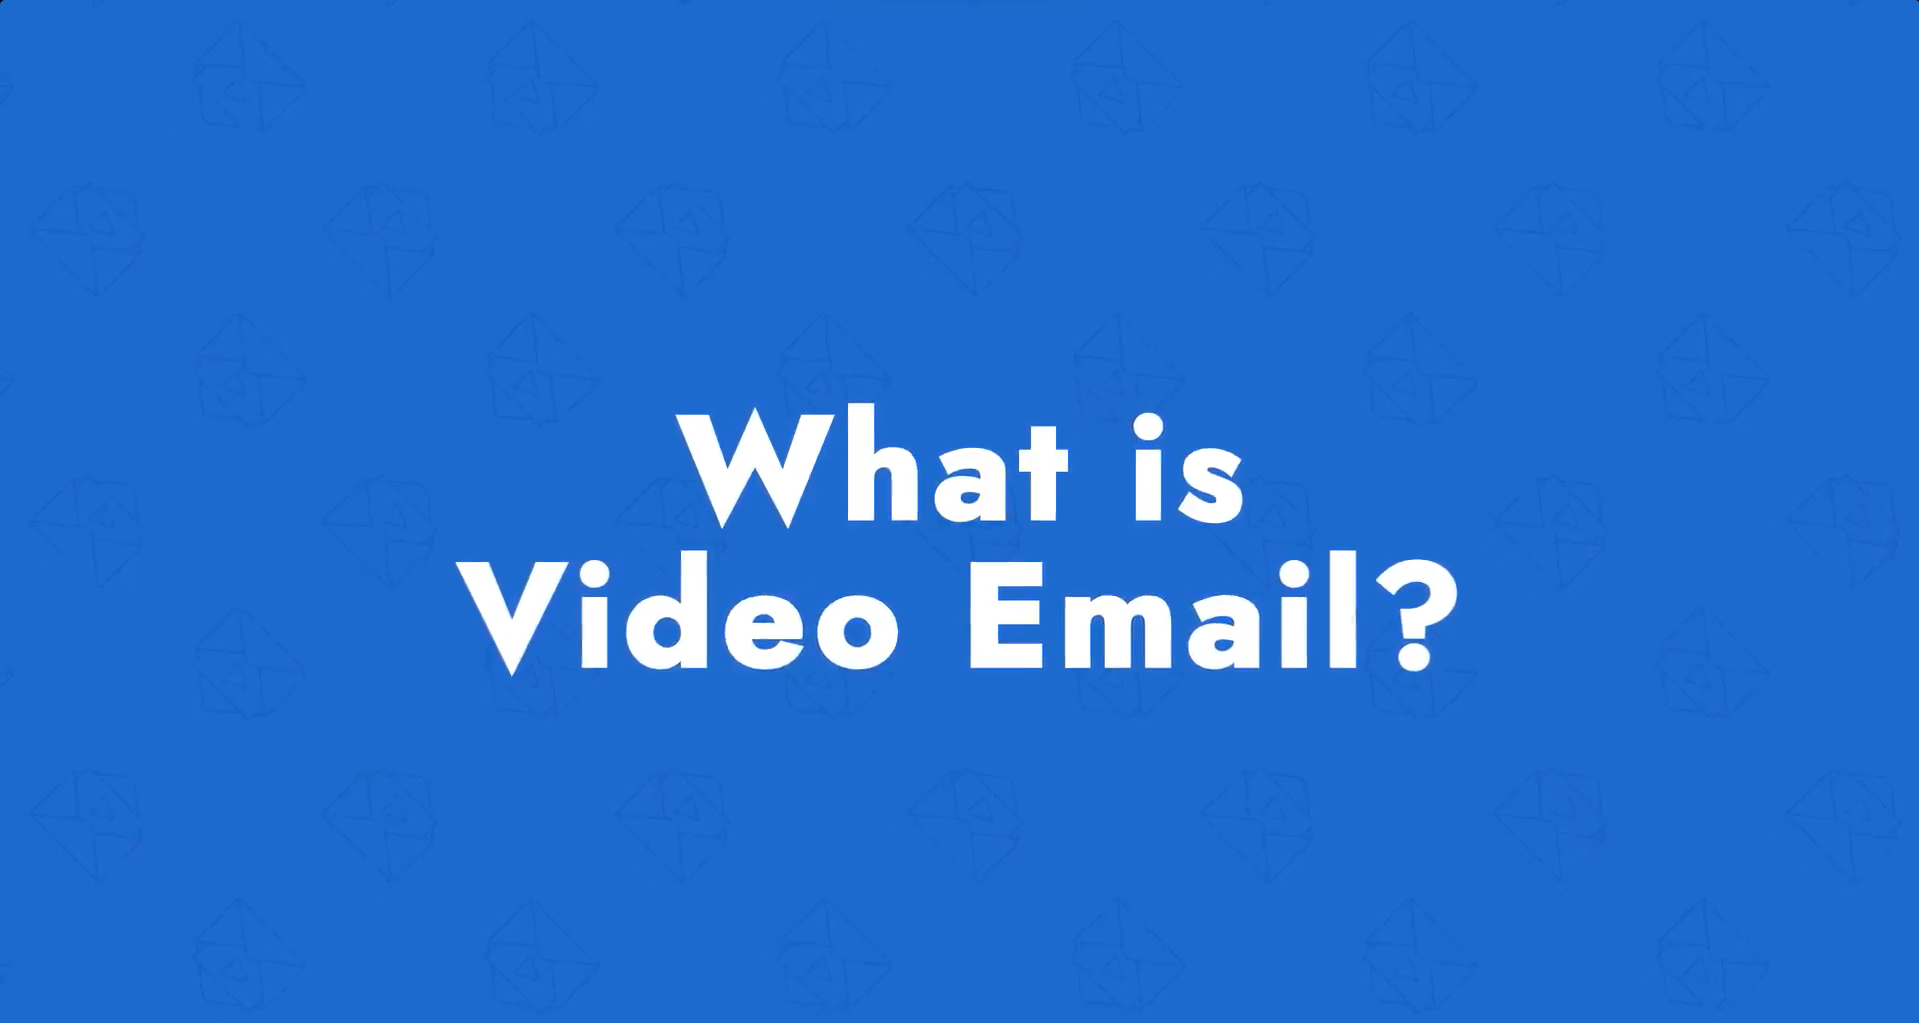 What is Video Email?